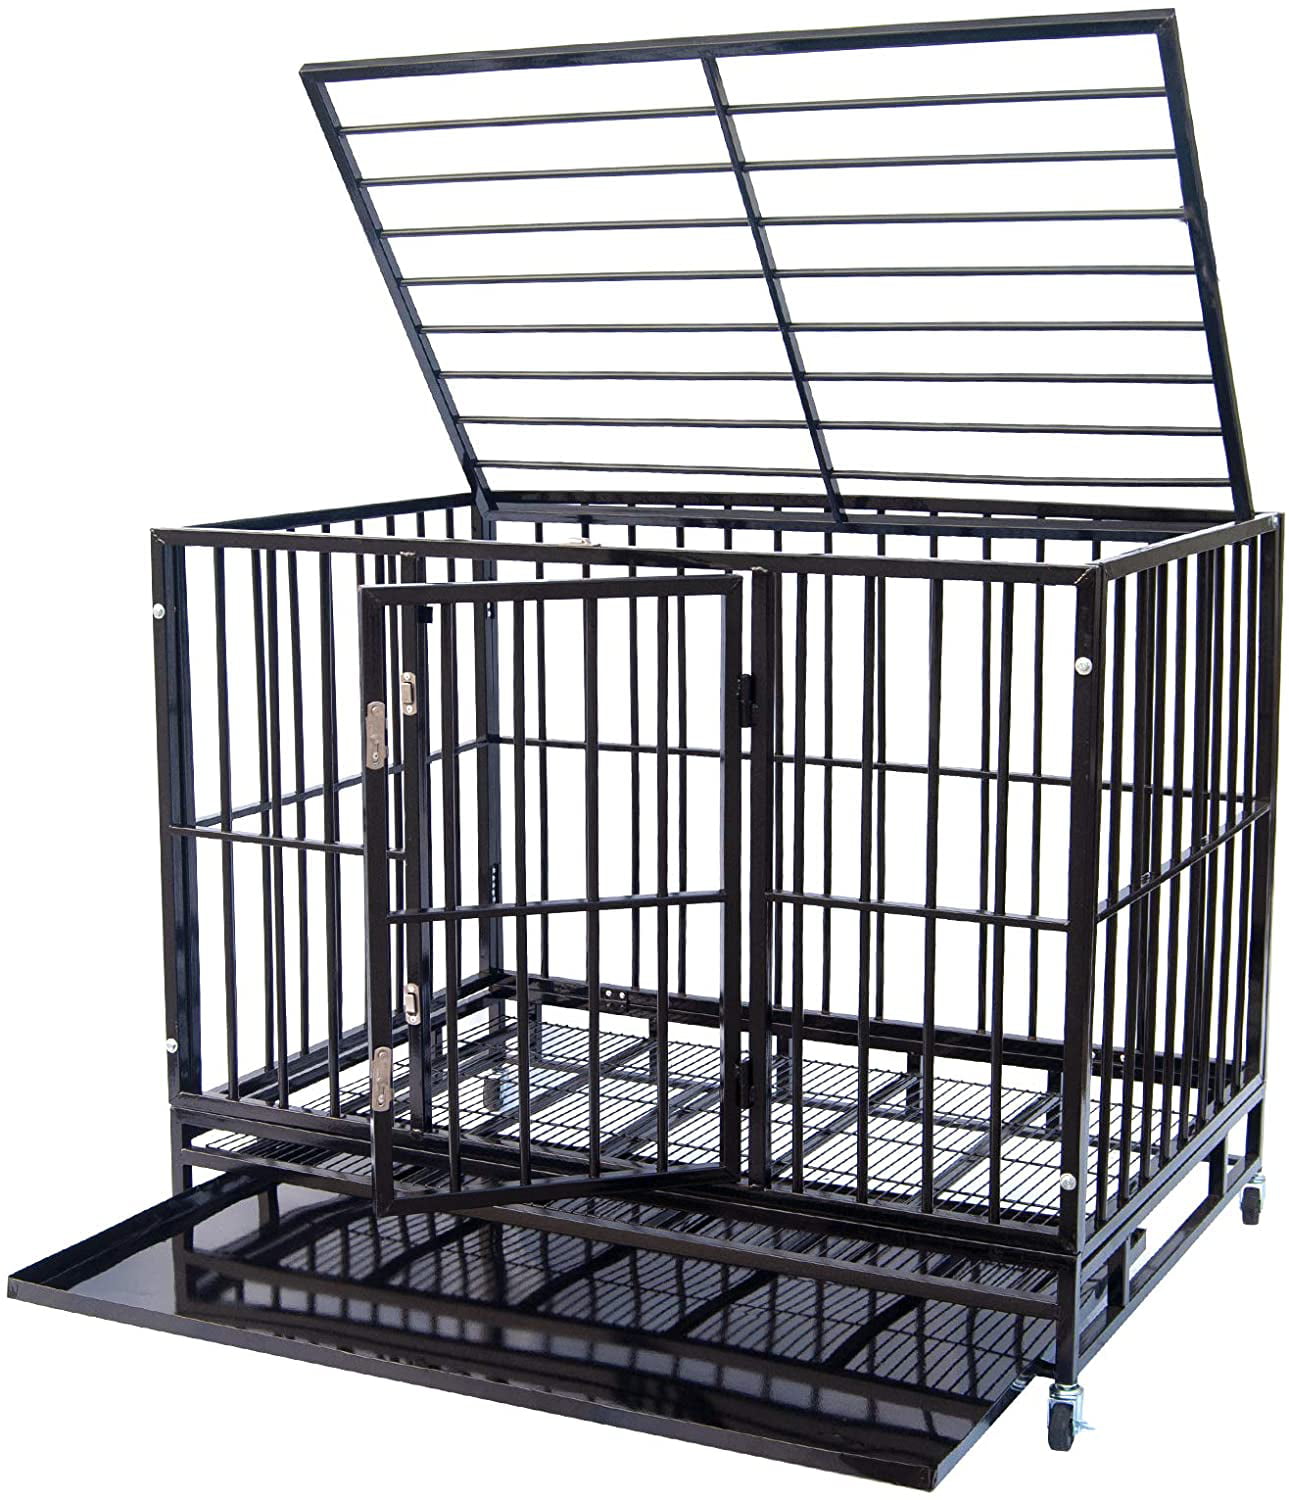 Polar Aurora Pet Dog Cage Heavy Duty Strong Metal Crate Dog